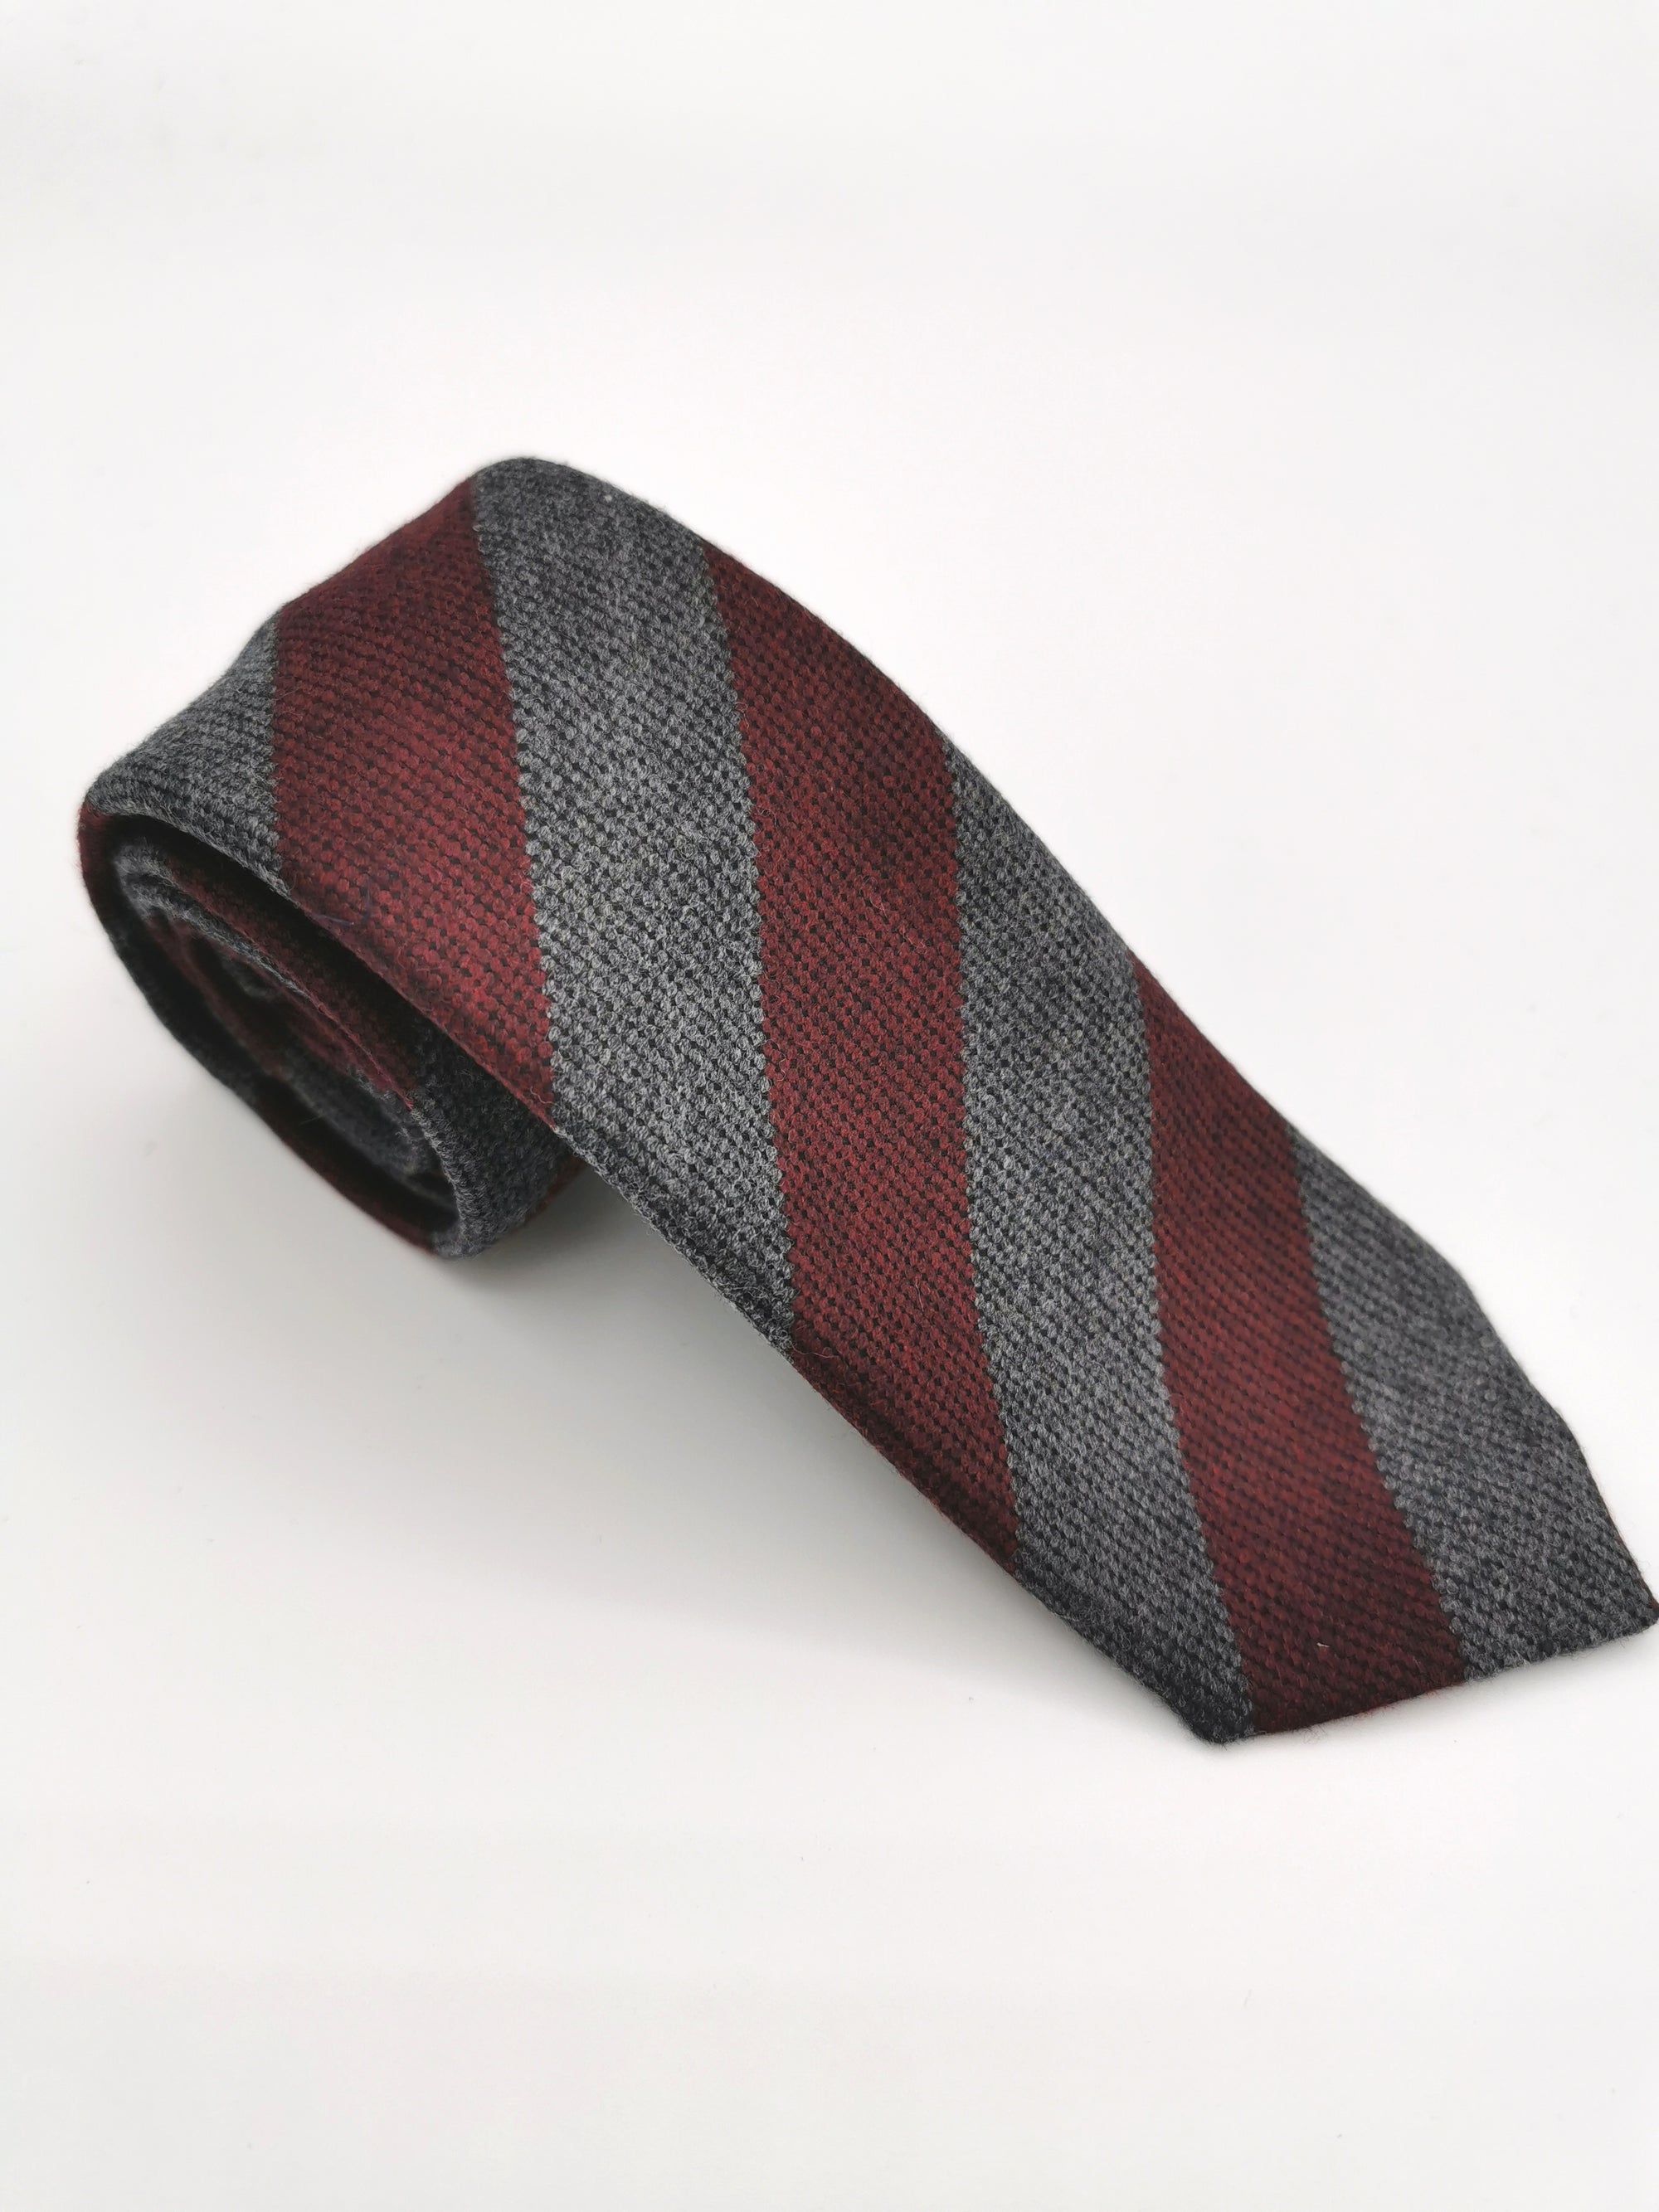 Ferala tie in wool/silk with gray and burgundy stripes